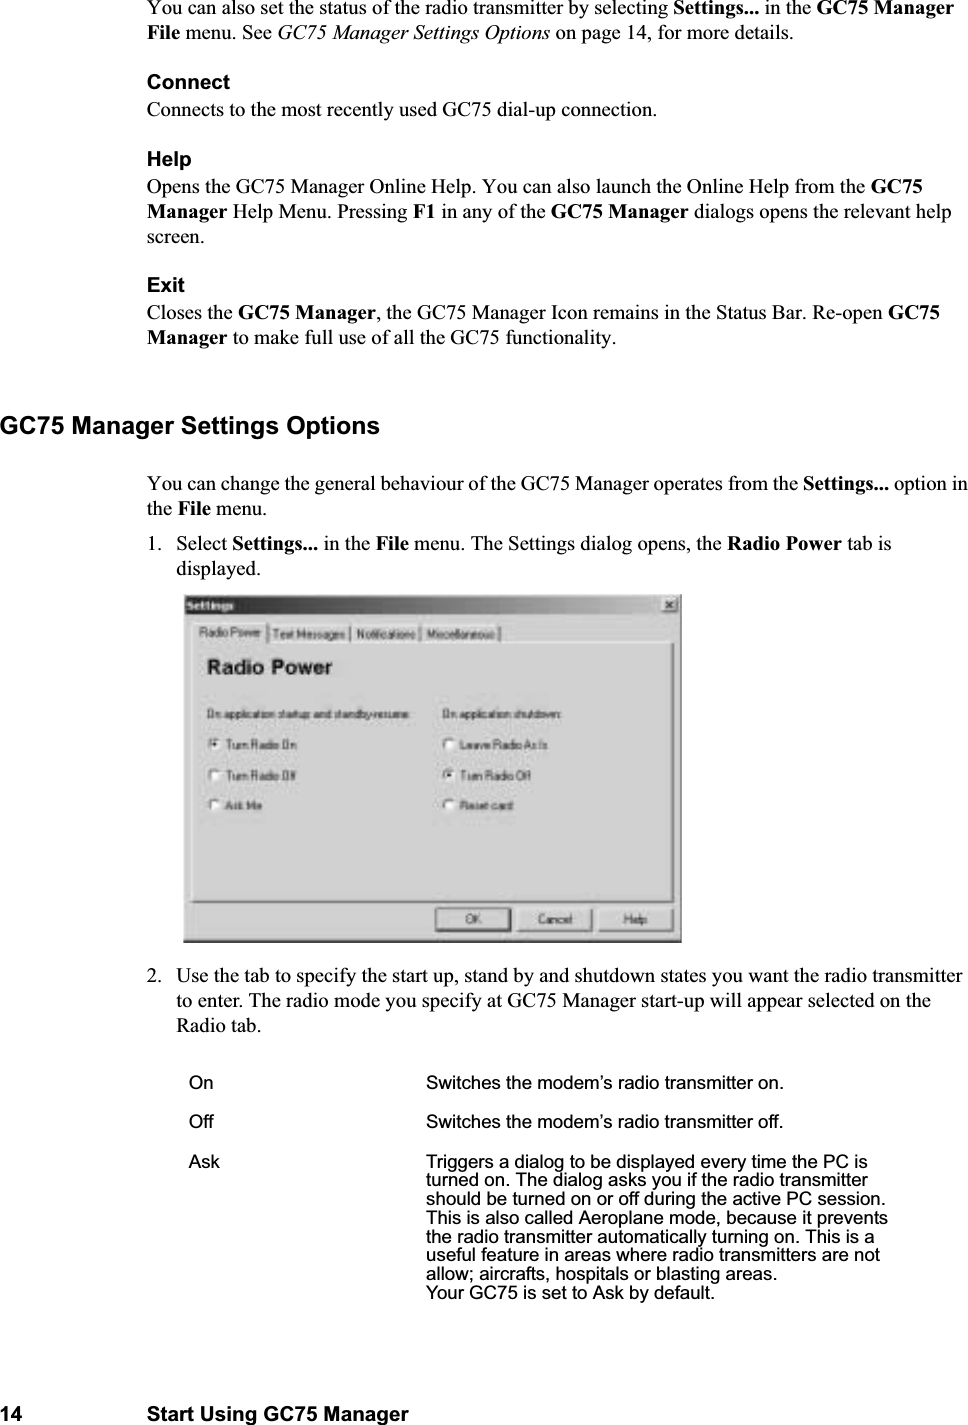 14 Start Using GC75 ManagerYou can also set the status of the radio transmitter by selecting Settings... in the GC75 Manager File menu. See GC75 Manager Settings Options on page 14, for more details.ConnectConnects to the most recently used GC75 dial-up connection.Help Opens the GC75 Manager Online Help. You can also launch the Online Help from the GC75 Manager Help Menu. Pressing F1 in any of the GC75 Manager dialogs opens the relevant help screen.ExitCloses the GC75 Manager, the GC75 Manager Icon remains in the Status Bar. Re-open GC75 Manager to make full use of all the GC75 functionality.GC75 Manager Settings OptionsYou can change the general behaviour of the GC75 Manager operates from the Settings... option in the File menu.1. Select Settings... in the File menu. The Settings dialog opens, the Radio Power tab is displayed.2. Use the tab to specify the start up, stand by and shutdown states you want the radio transmitter to enter. The radio mode you specify at GC75 Manager start-up will appear selected on the Radio tab.On Switches the modem’s radio transmitter on.Off Switches the modem’s radio transmitter off.Ask Triggers a dialog to be displayed every time the PC is turned on. The dialog asks you if the radio transmitter should be turned on or off during the active PC session. This is also called Aeroplane mode, because it prevents the radio transmitter automatically turning on. This is a useful feature in areas where radio transmitters are not allow; aircrafts, hospitals or blasting areas.Your GC75 is set to Ask by default.